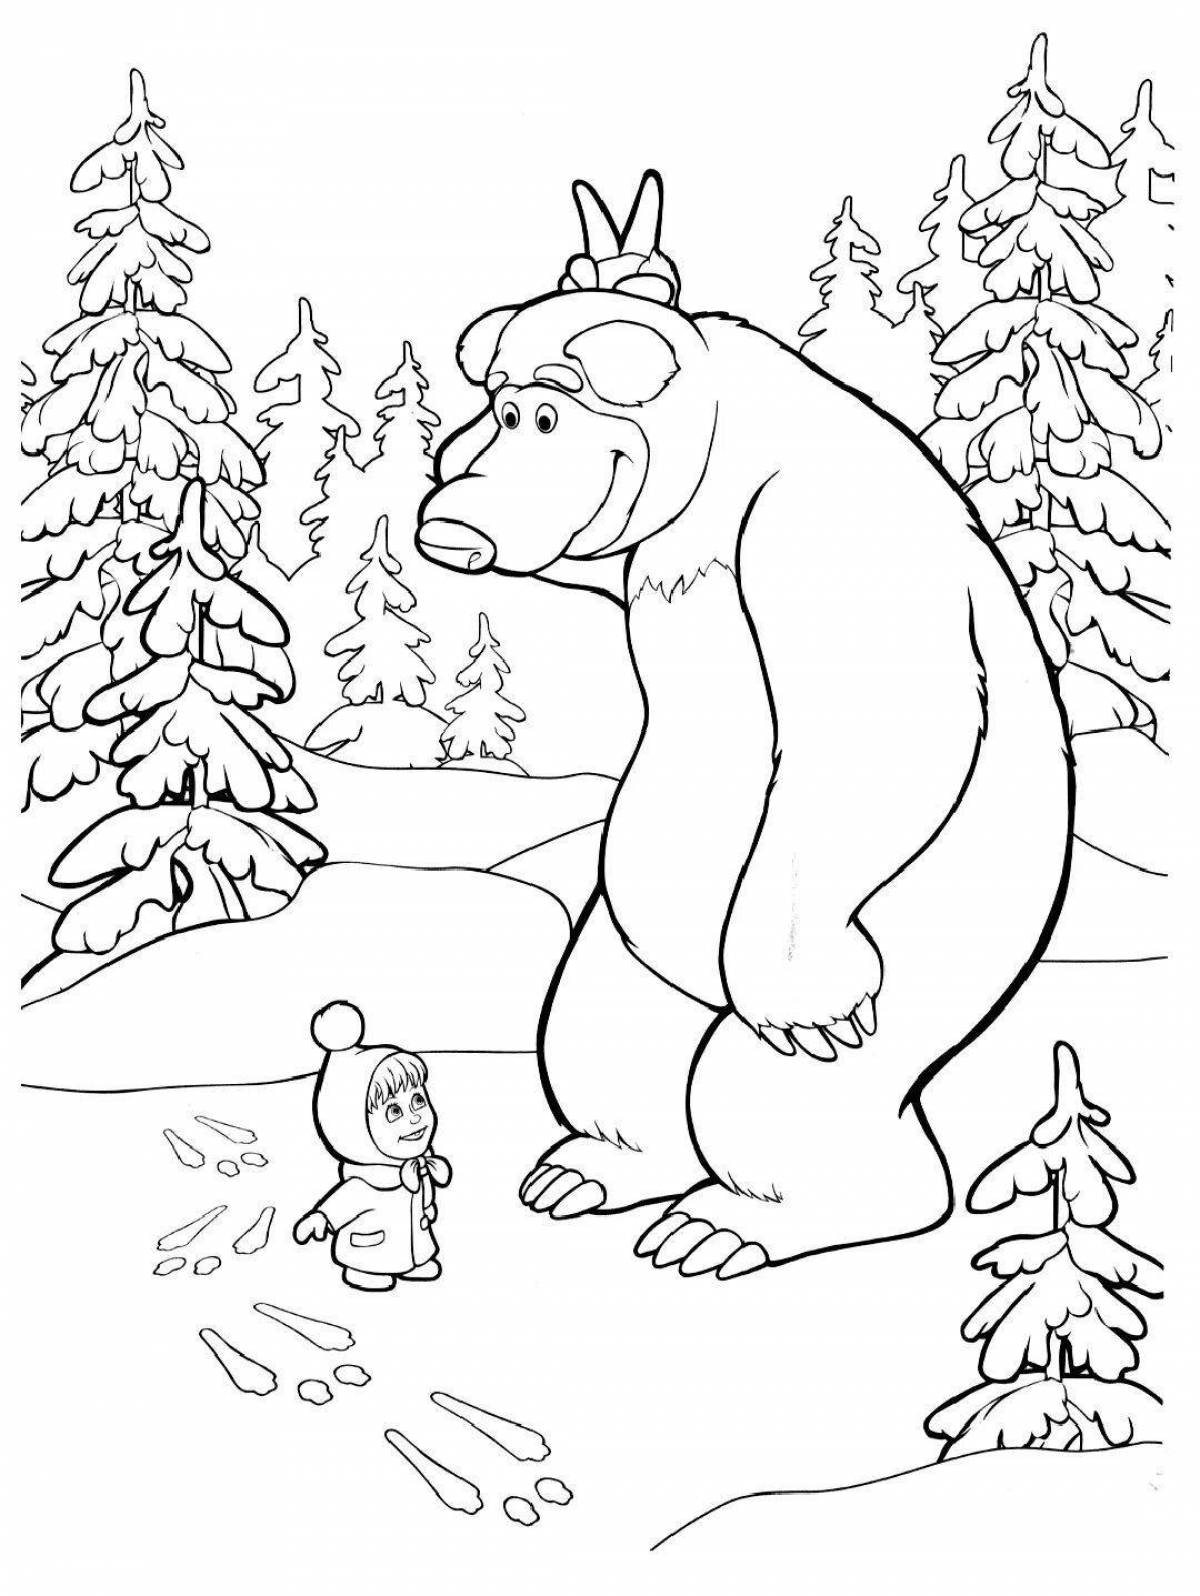 Watchful bear in the forest coloring page